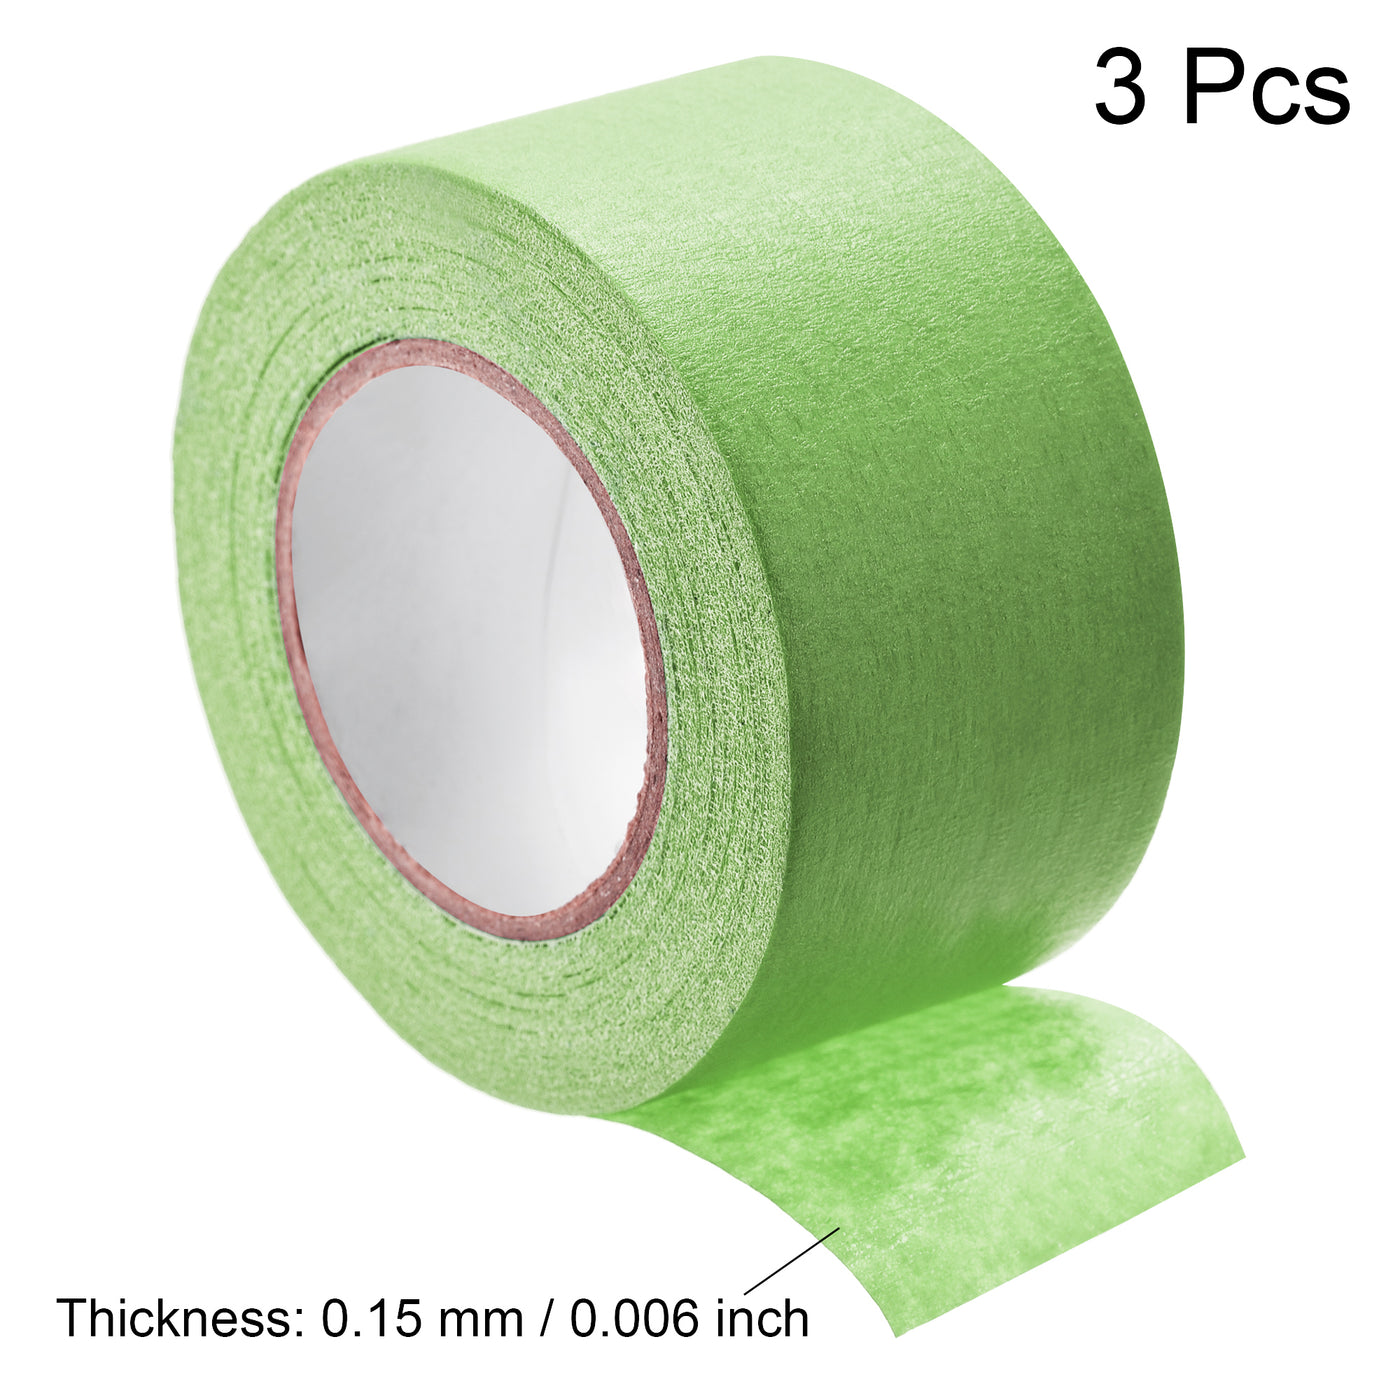 uxcell Uxcell 3Pcs 40mm 1.6 inch Wide 20m 21 Yards Masking Tape Painter Tape Rolls Light Green